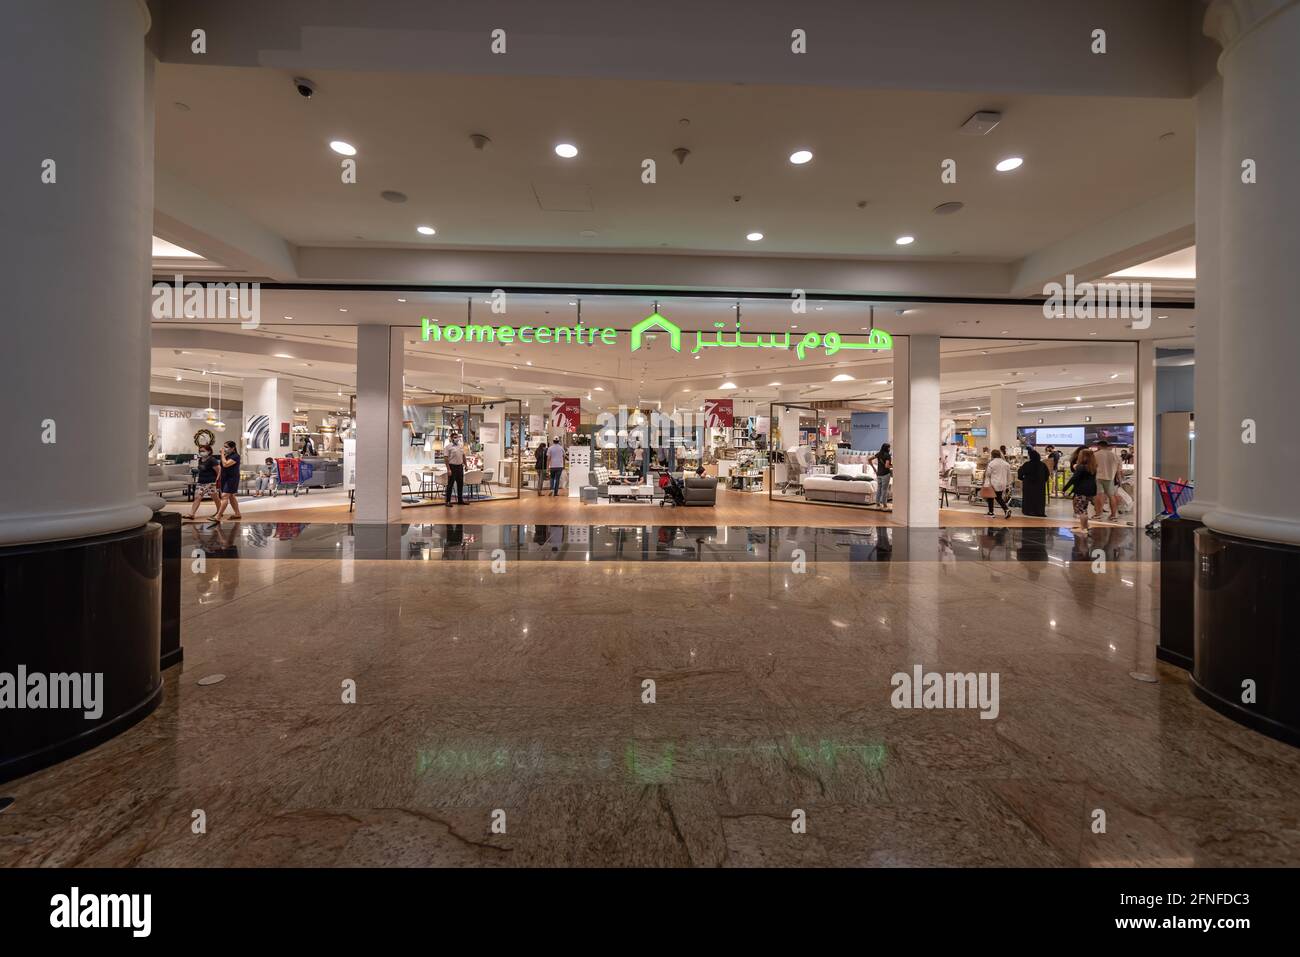 Dubai, United Arab Emirates – May 12, 2021, the Home Centre retails shop at  Mall of Emirates shopping mall Stock Photo - Alamy